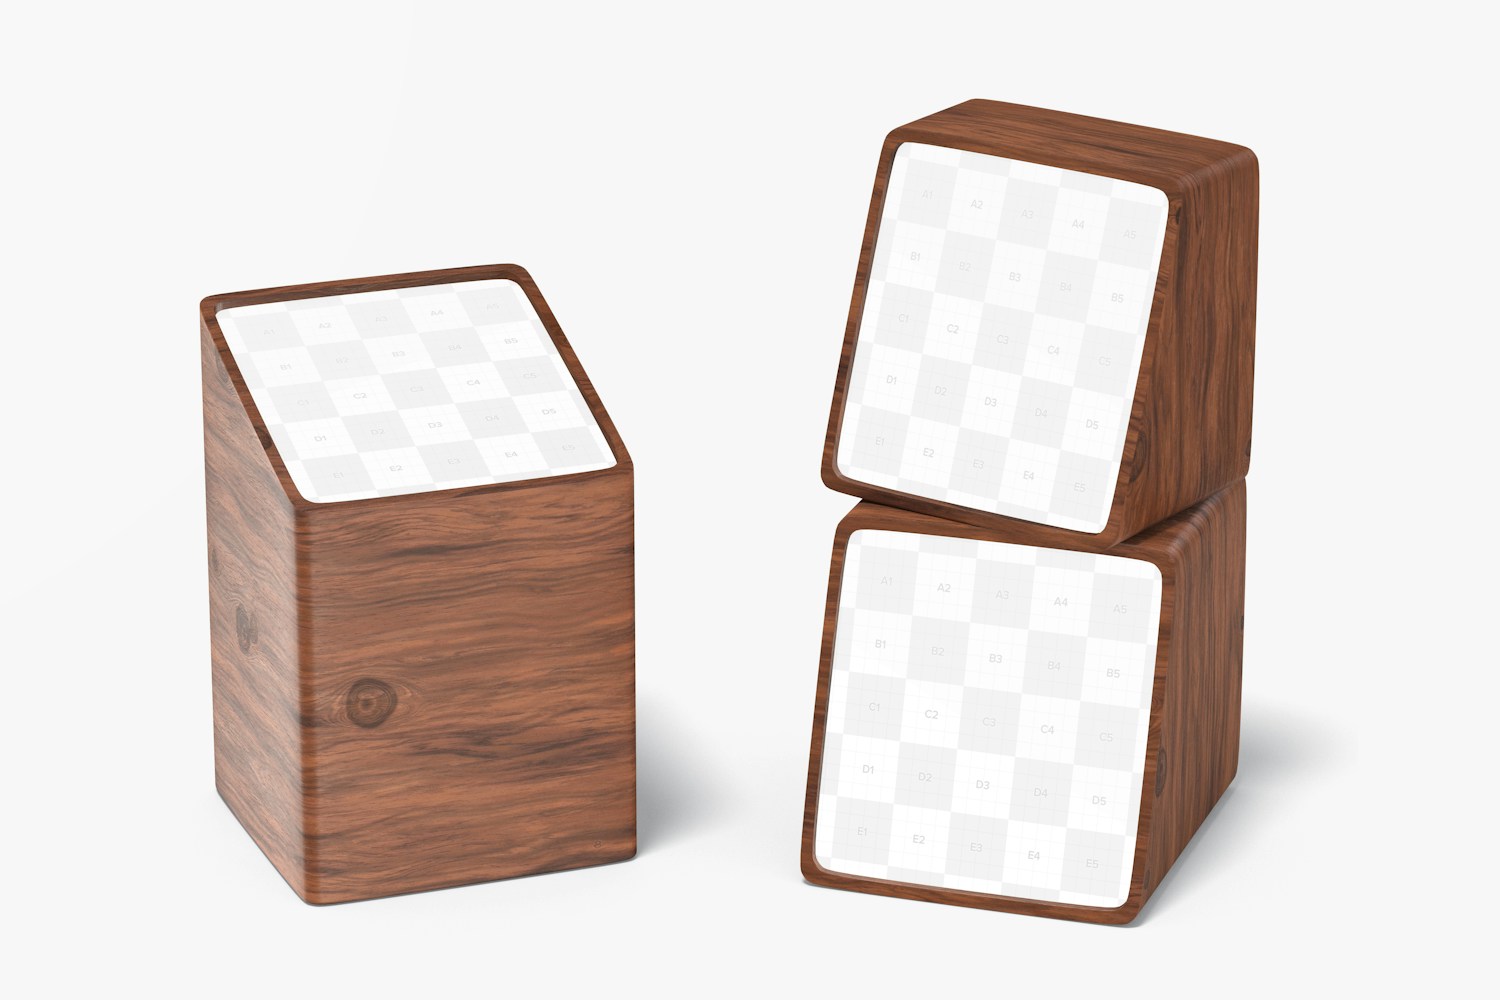 Wood Mini Price Label Holders Mockup, Right View